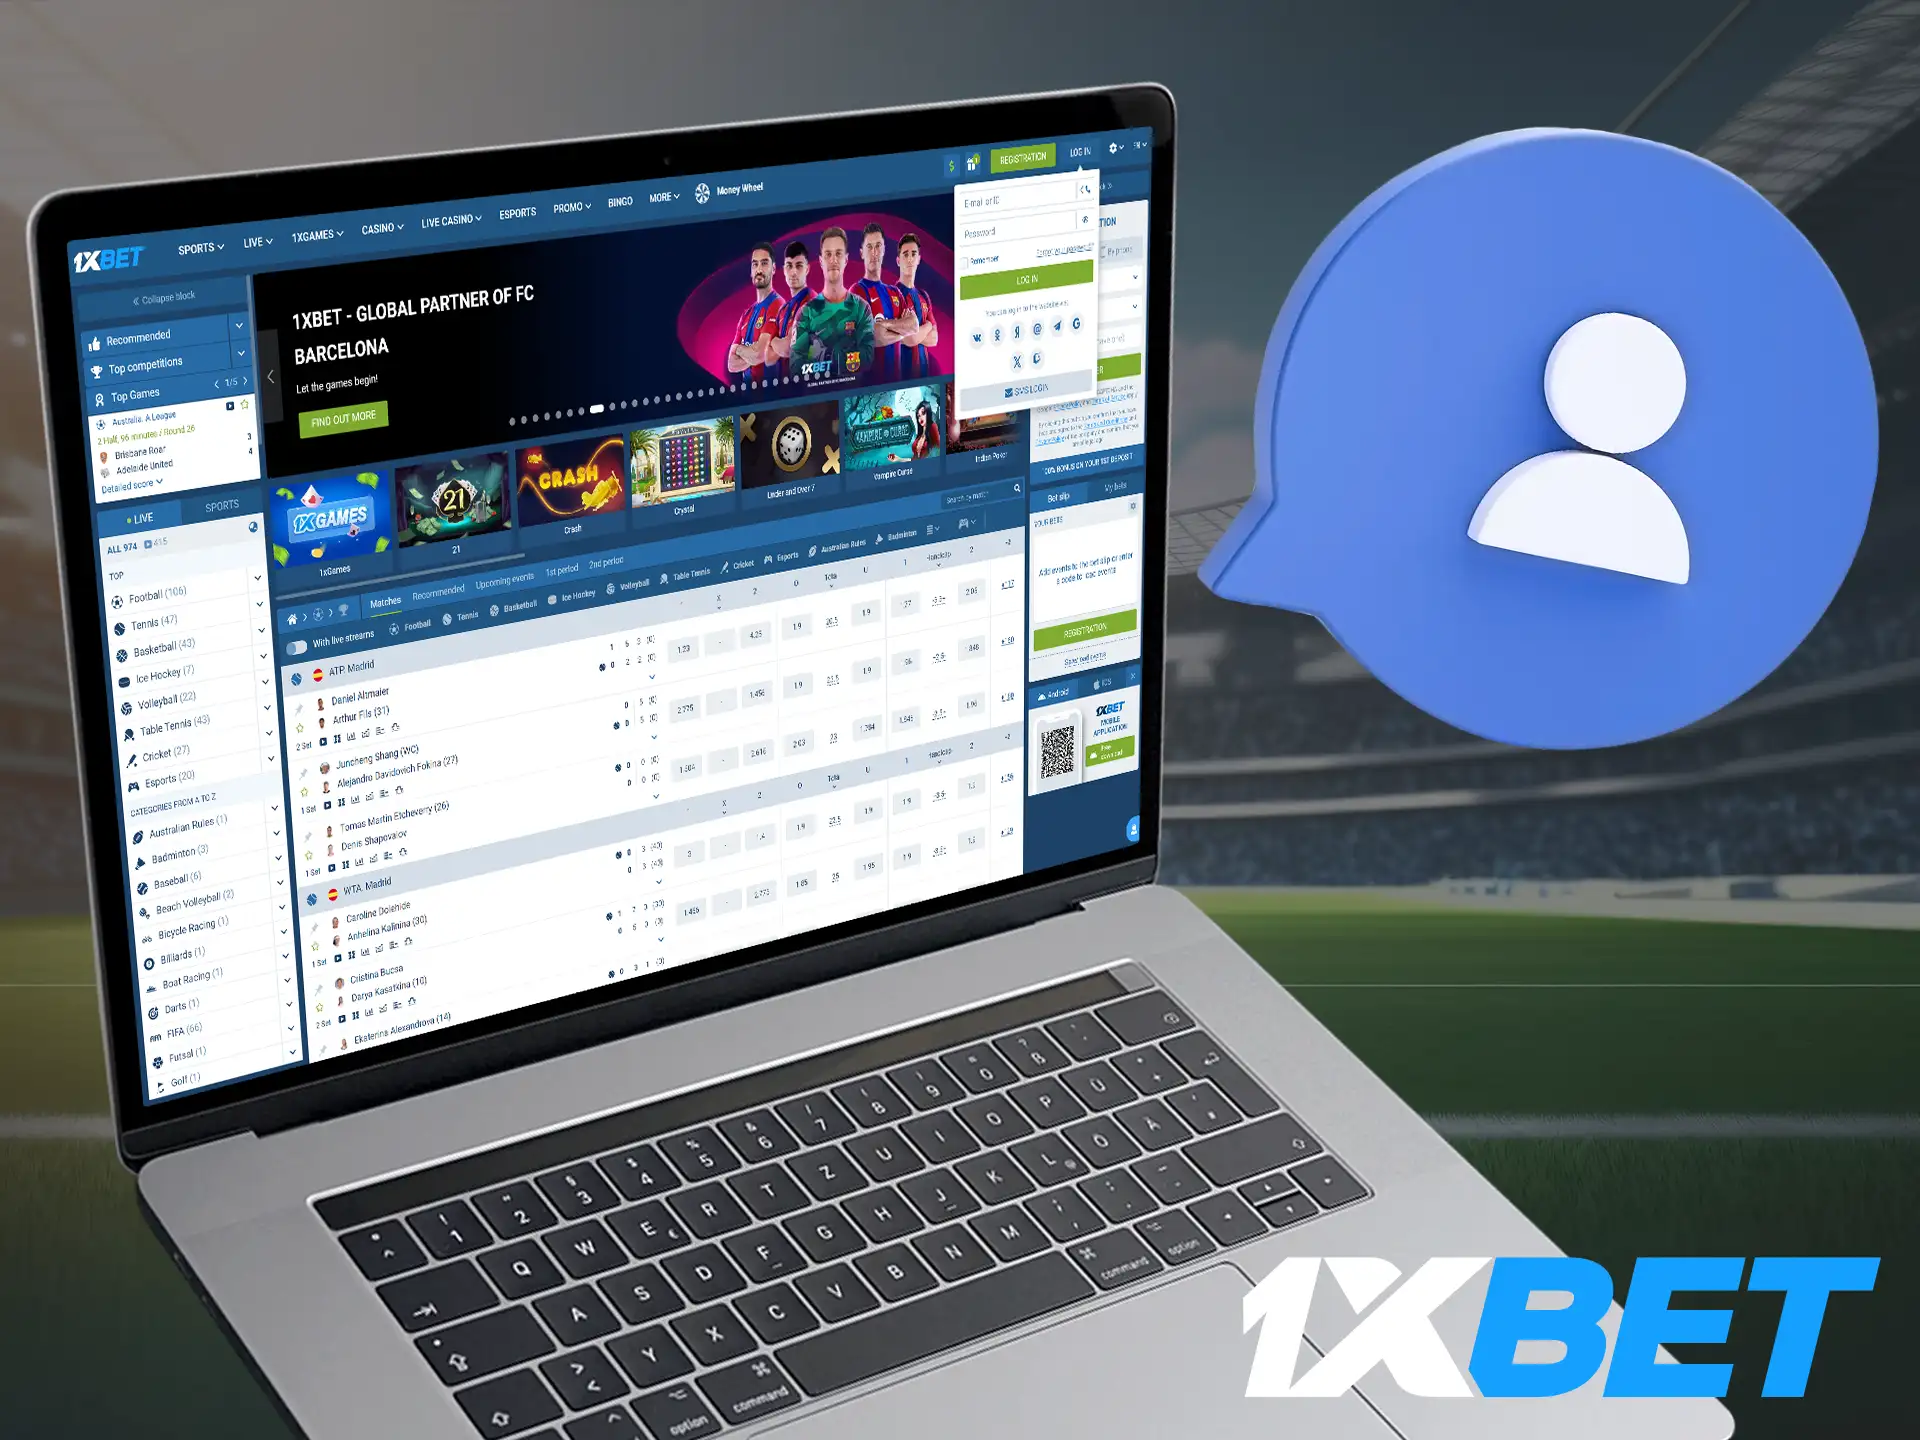 If you have previously created an account on the 1xBet site, then to start placing bets, you only need to log in to the platform.